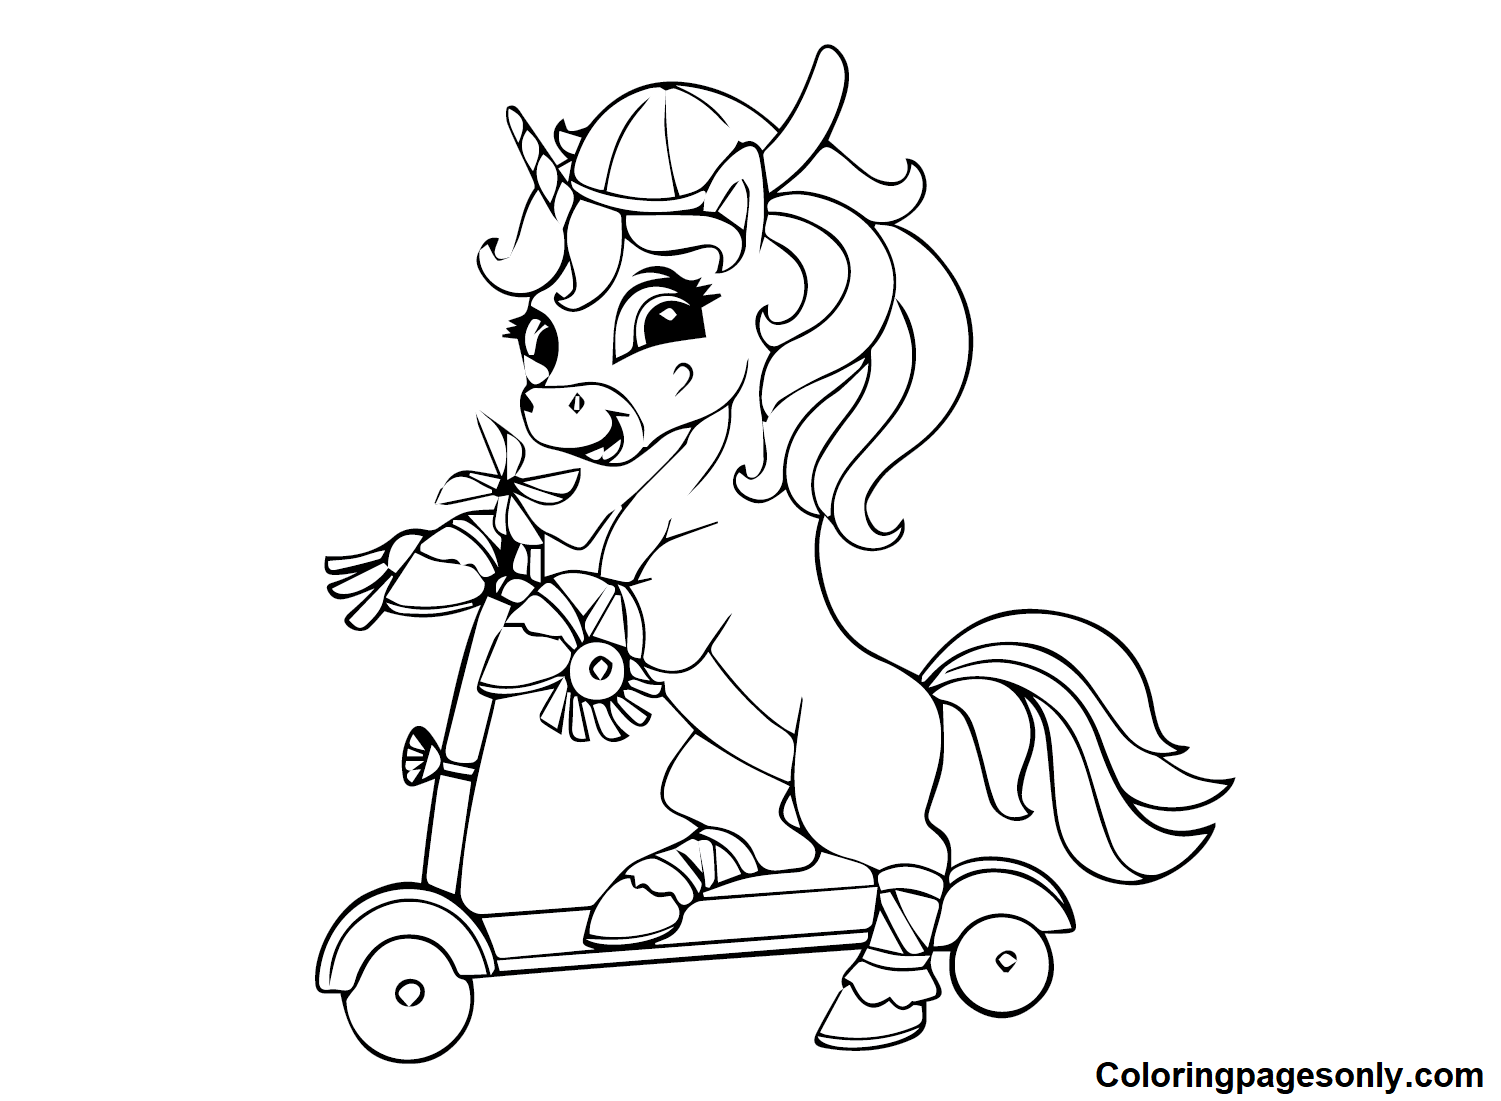 Floof Rainbow Rangers Coloring Page